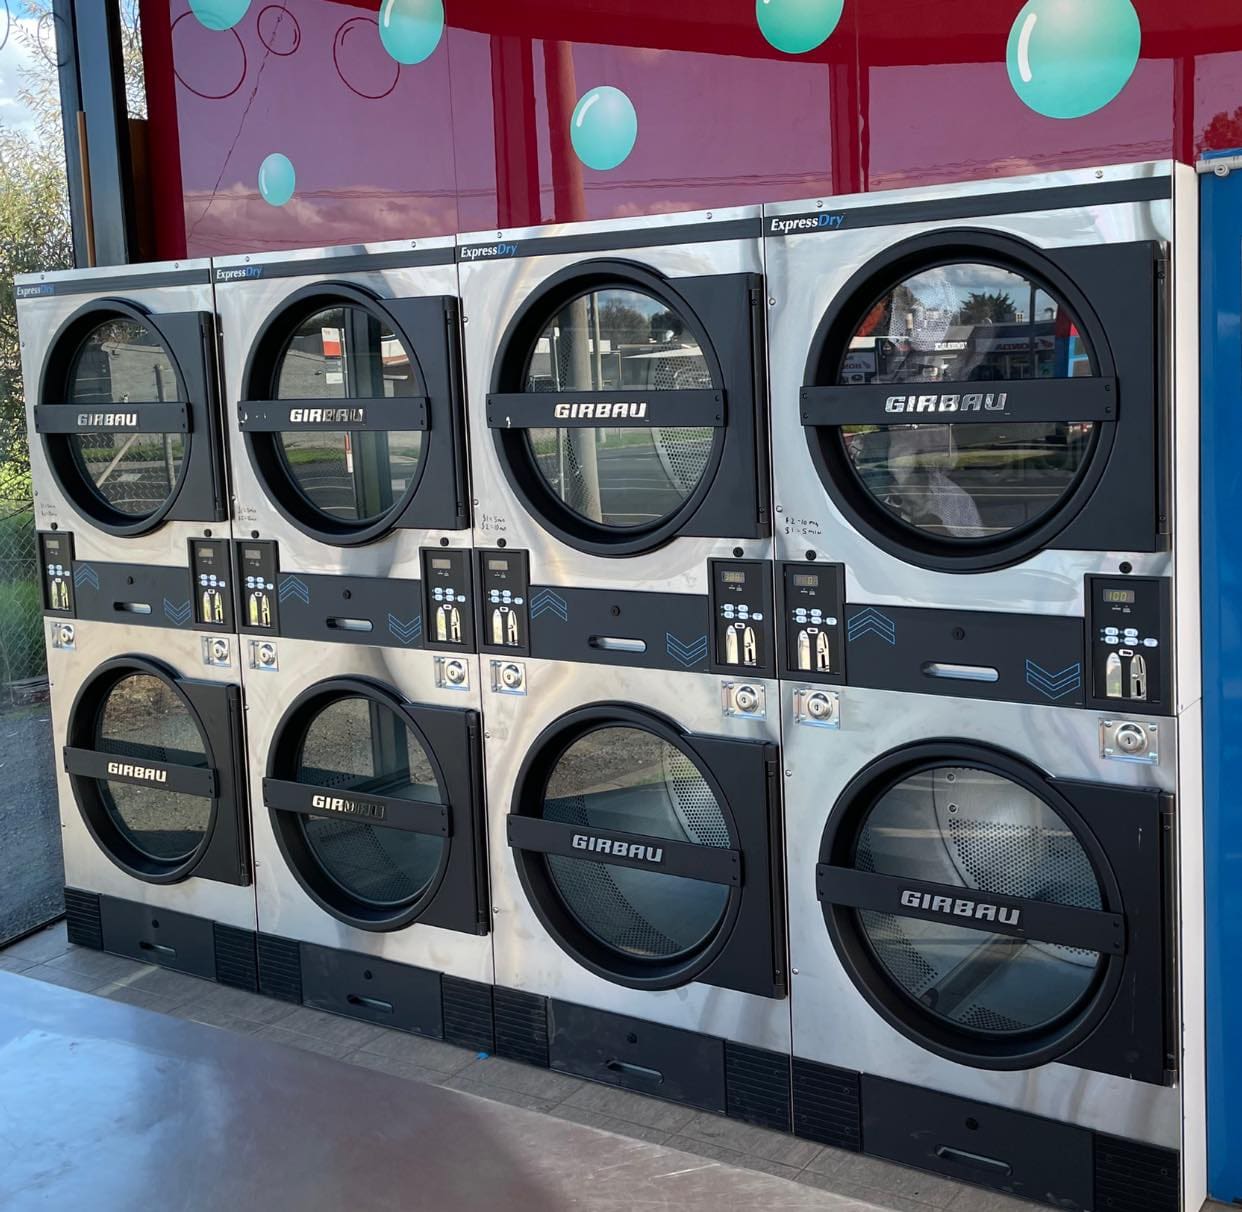 Drycleaning machines